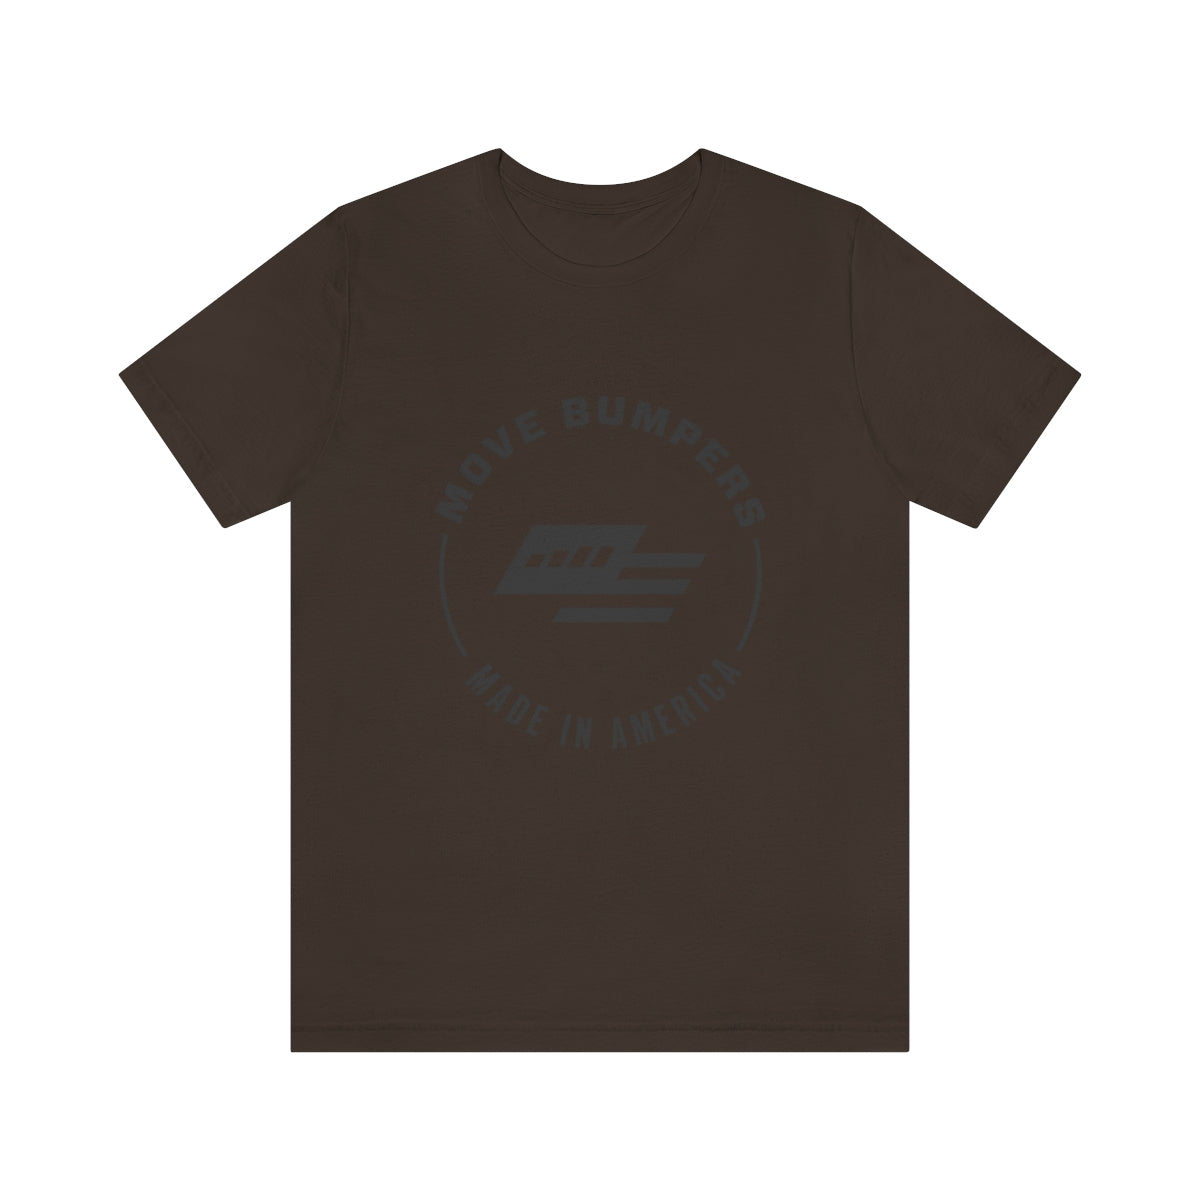 MOVE Bumpers - T-shirt Brown